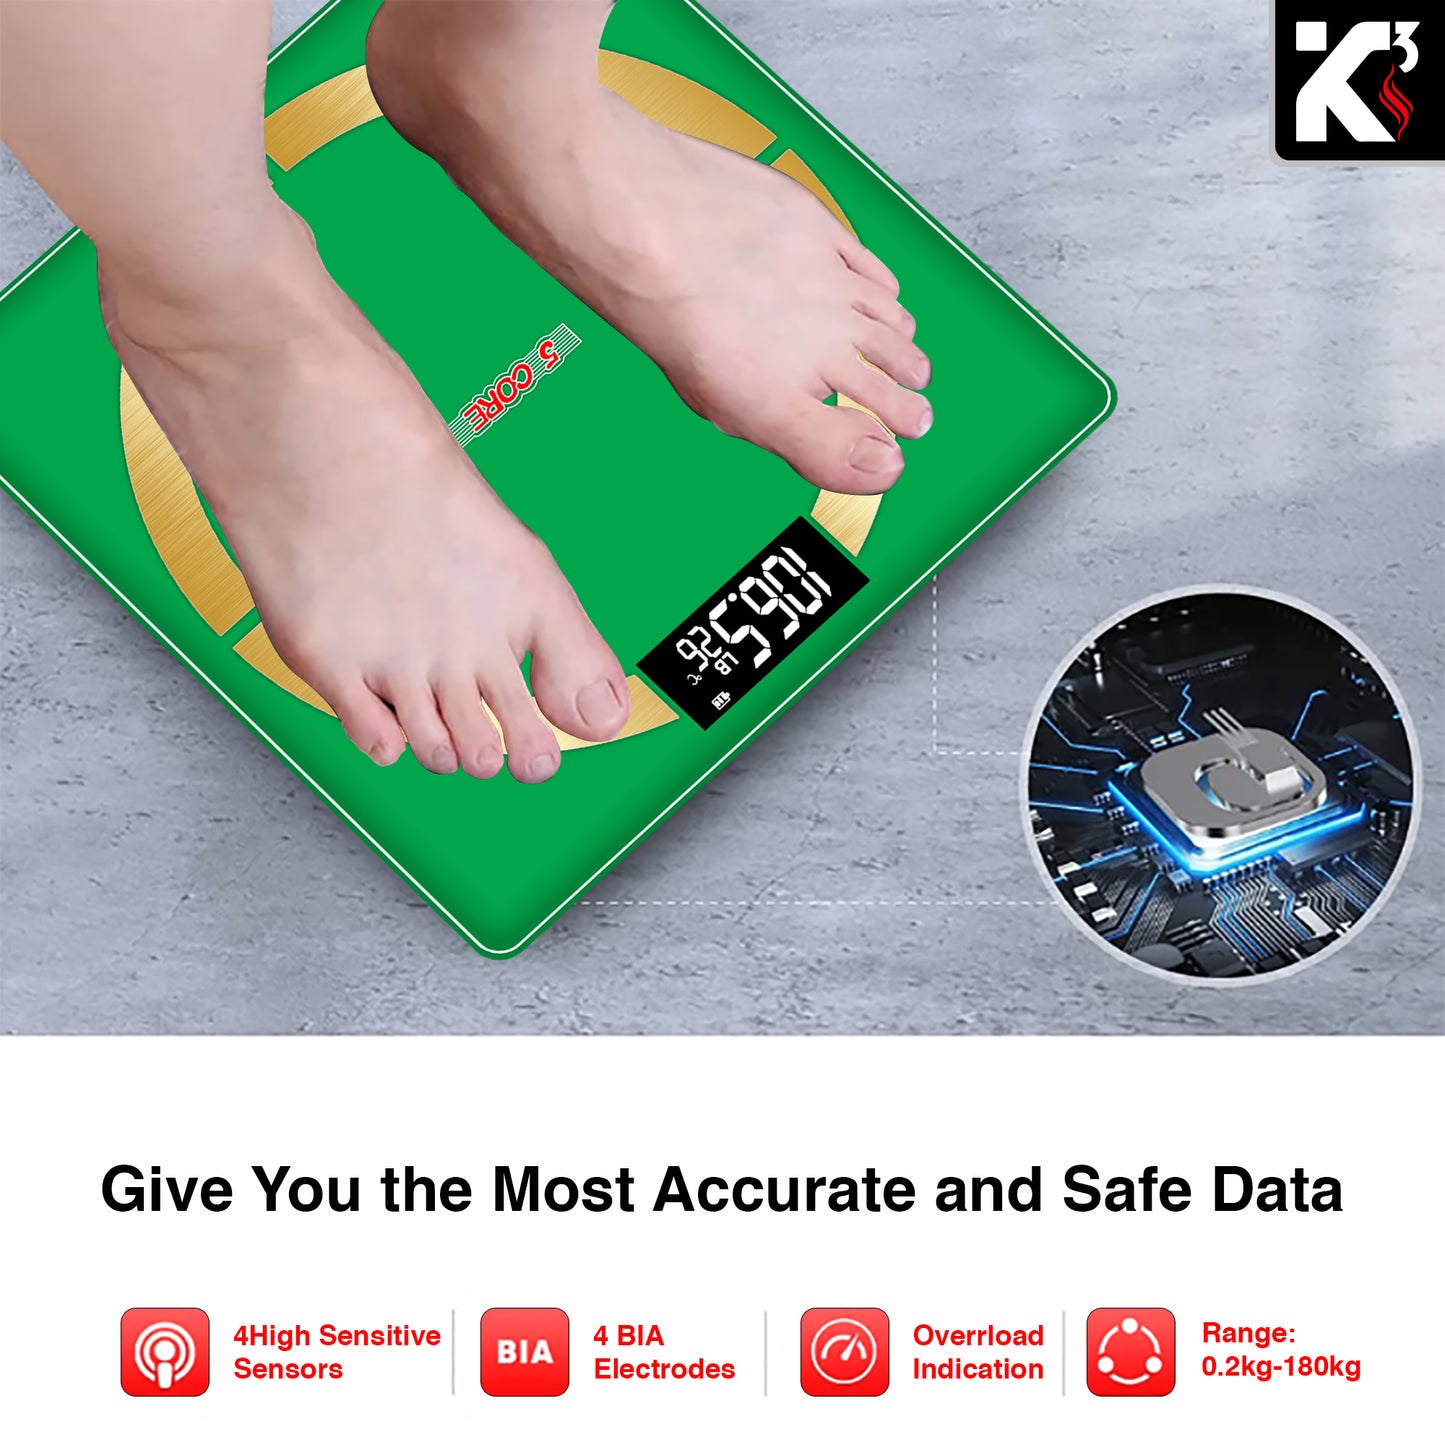 Kcubeinc Smart Digital Scale for Body Weight and Fat Percentage, Battery Power Digital Bathroom Smart Scale Bluetooth Body Fat Scale, BMI Monitor with App 400lbs- BBS 03 B SG